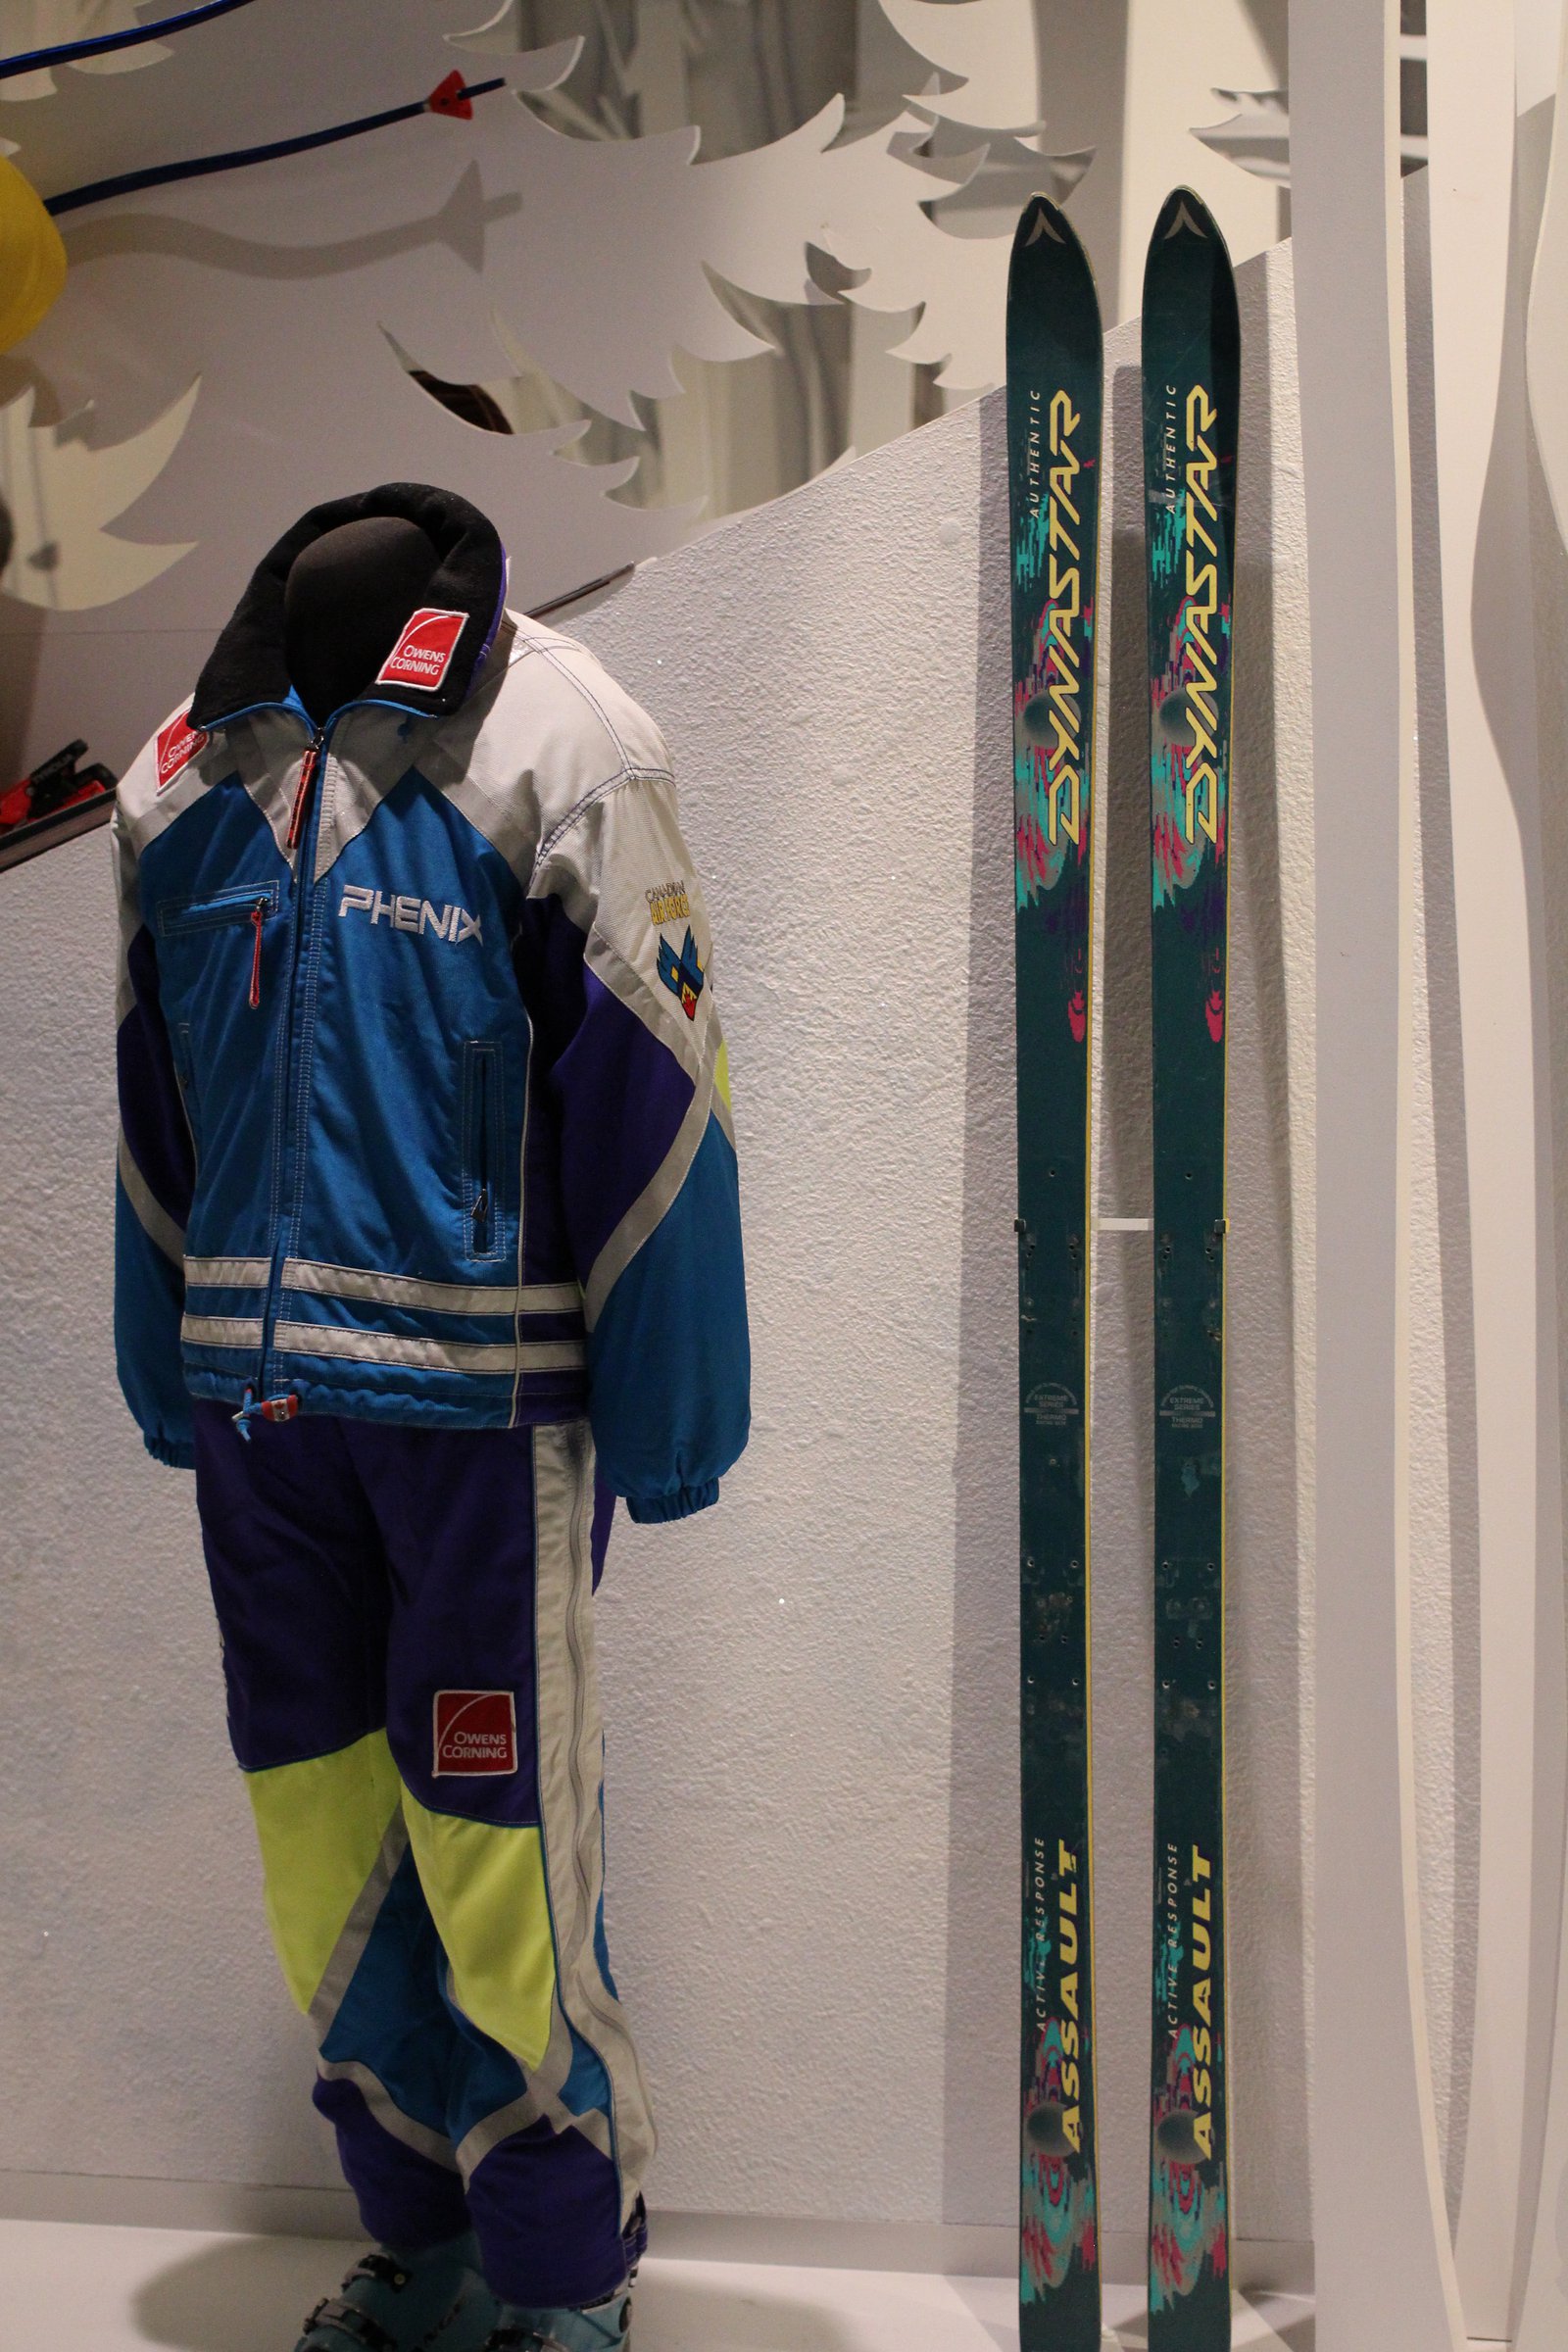 new Canadian air force suit and skis...